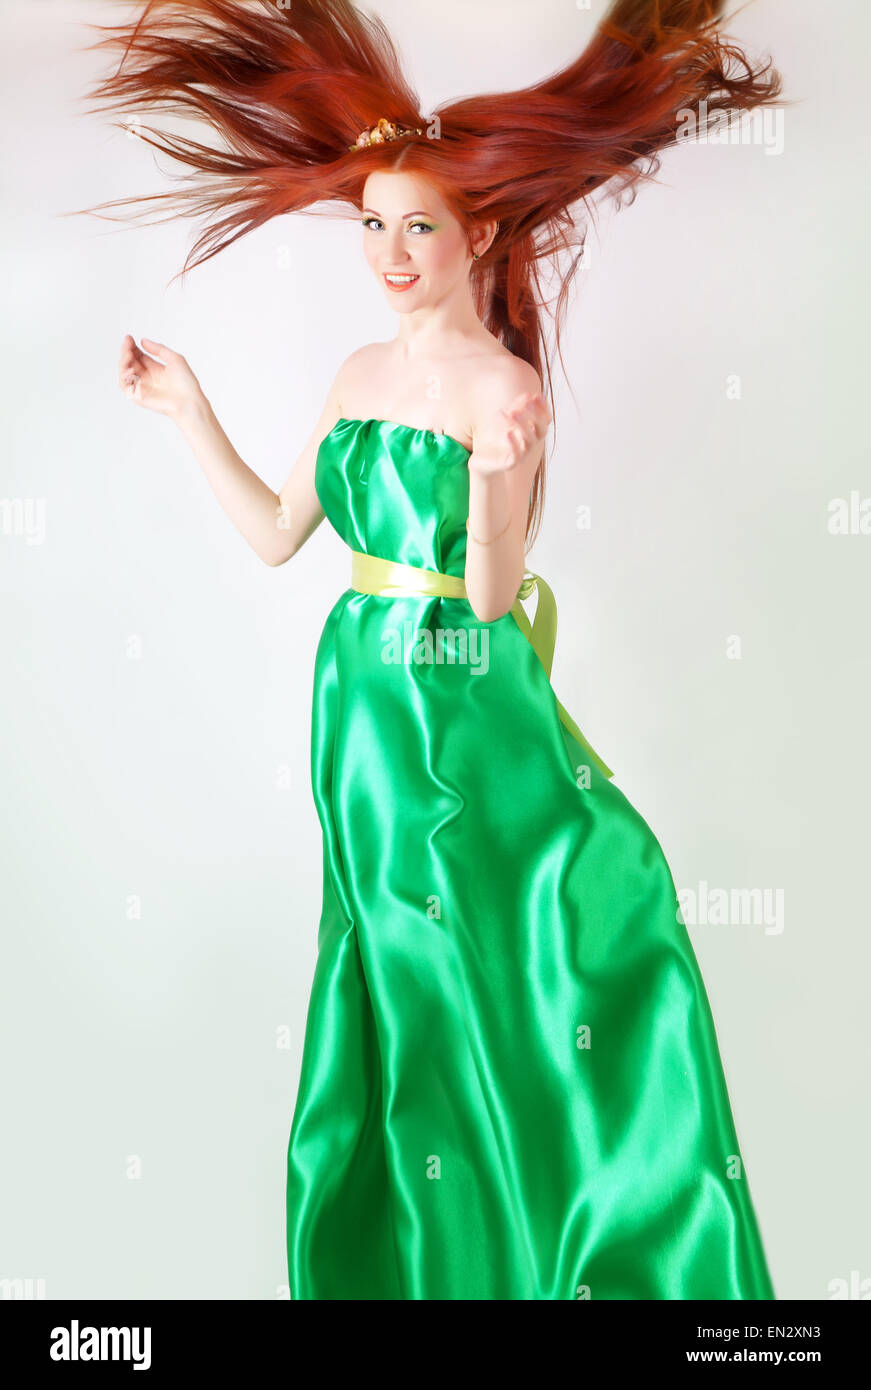 Red-haired girl in a green dress with flowing hair Stock Photo